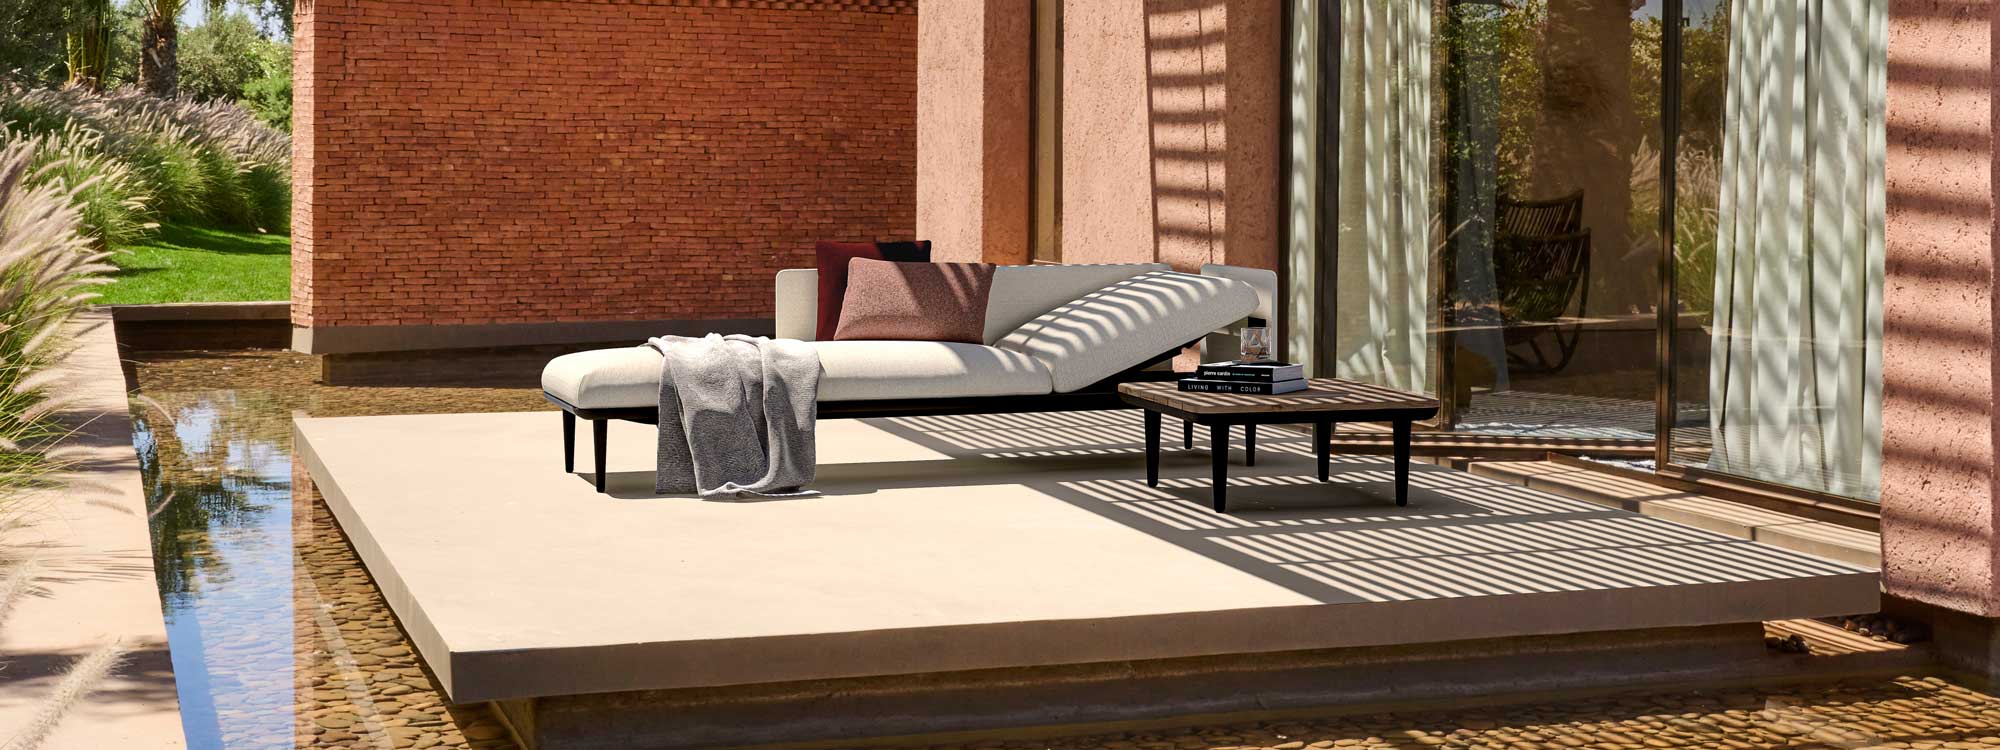 Image of Styletto upholstered garden lounger by Royal Botania pictured on terrace surrounded by water feature